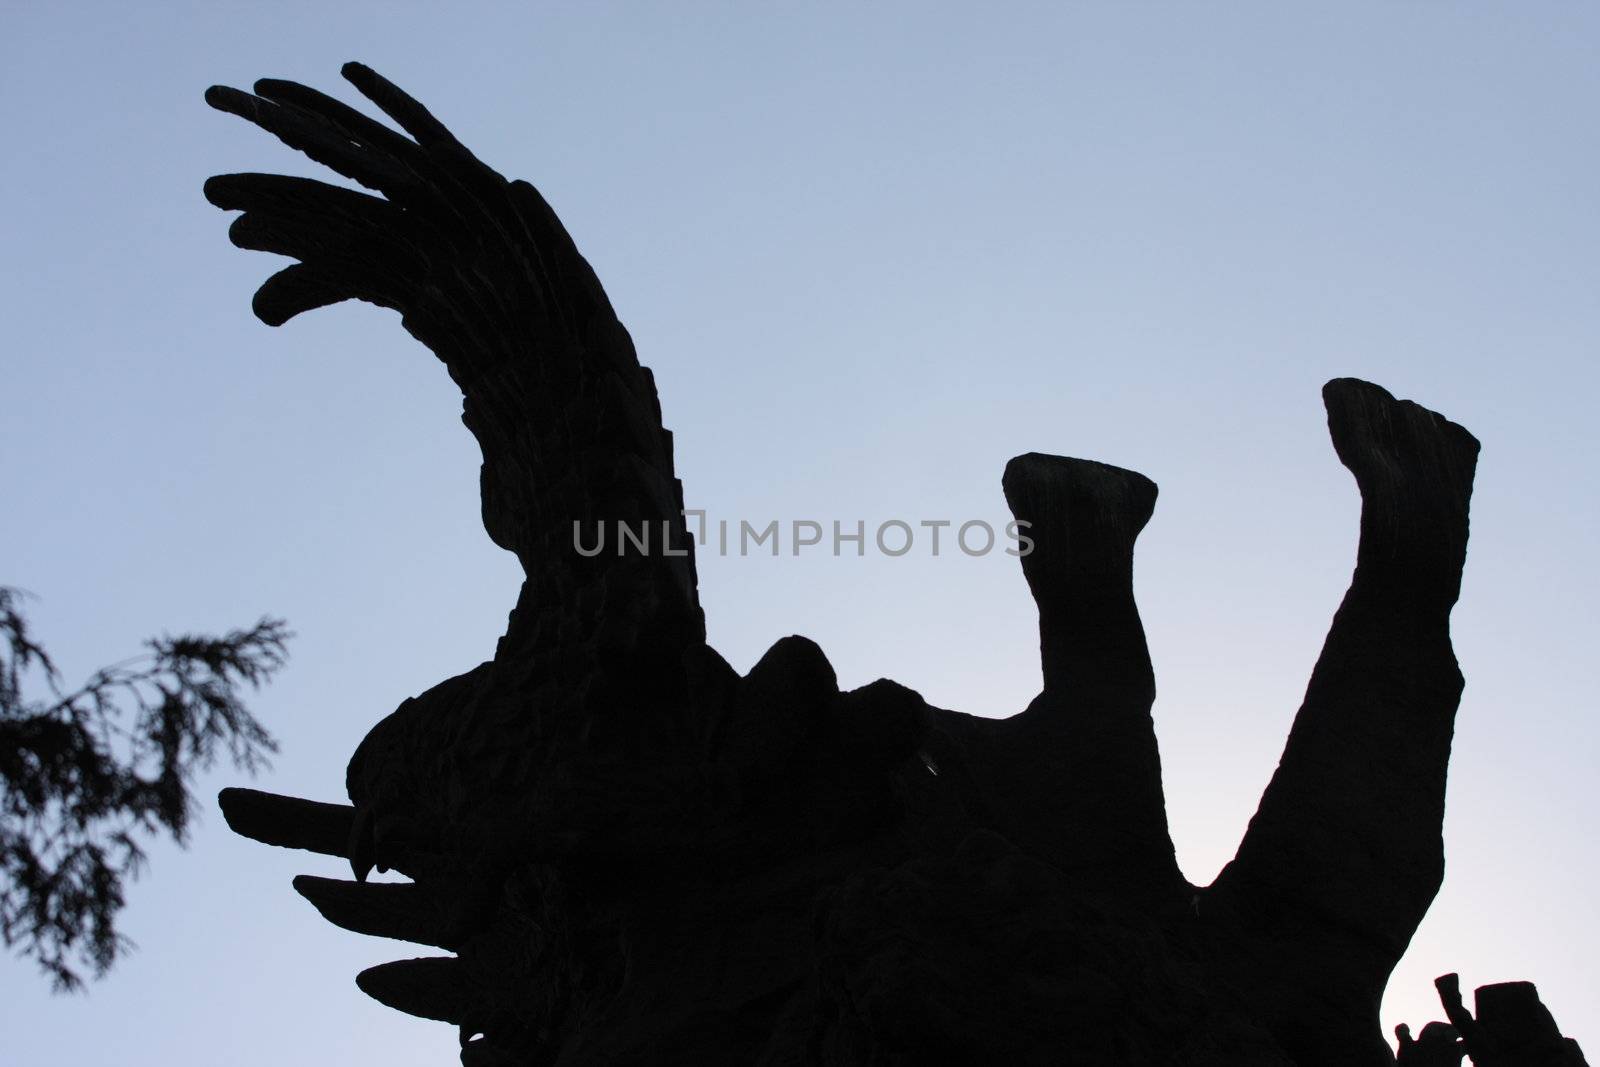 Monument, shade, image, wing, sculpture